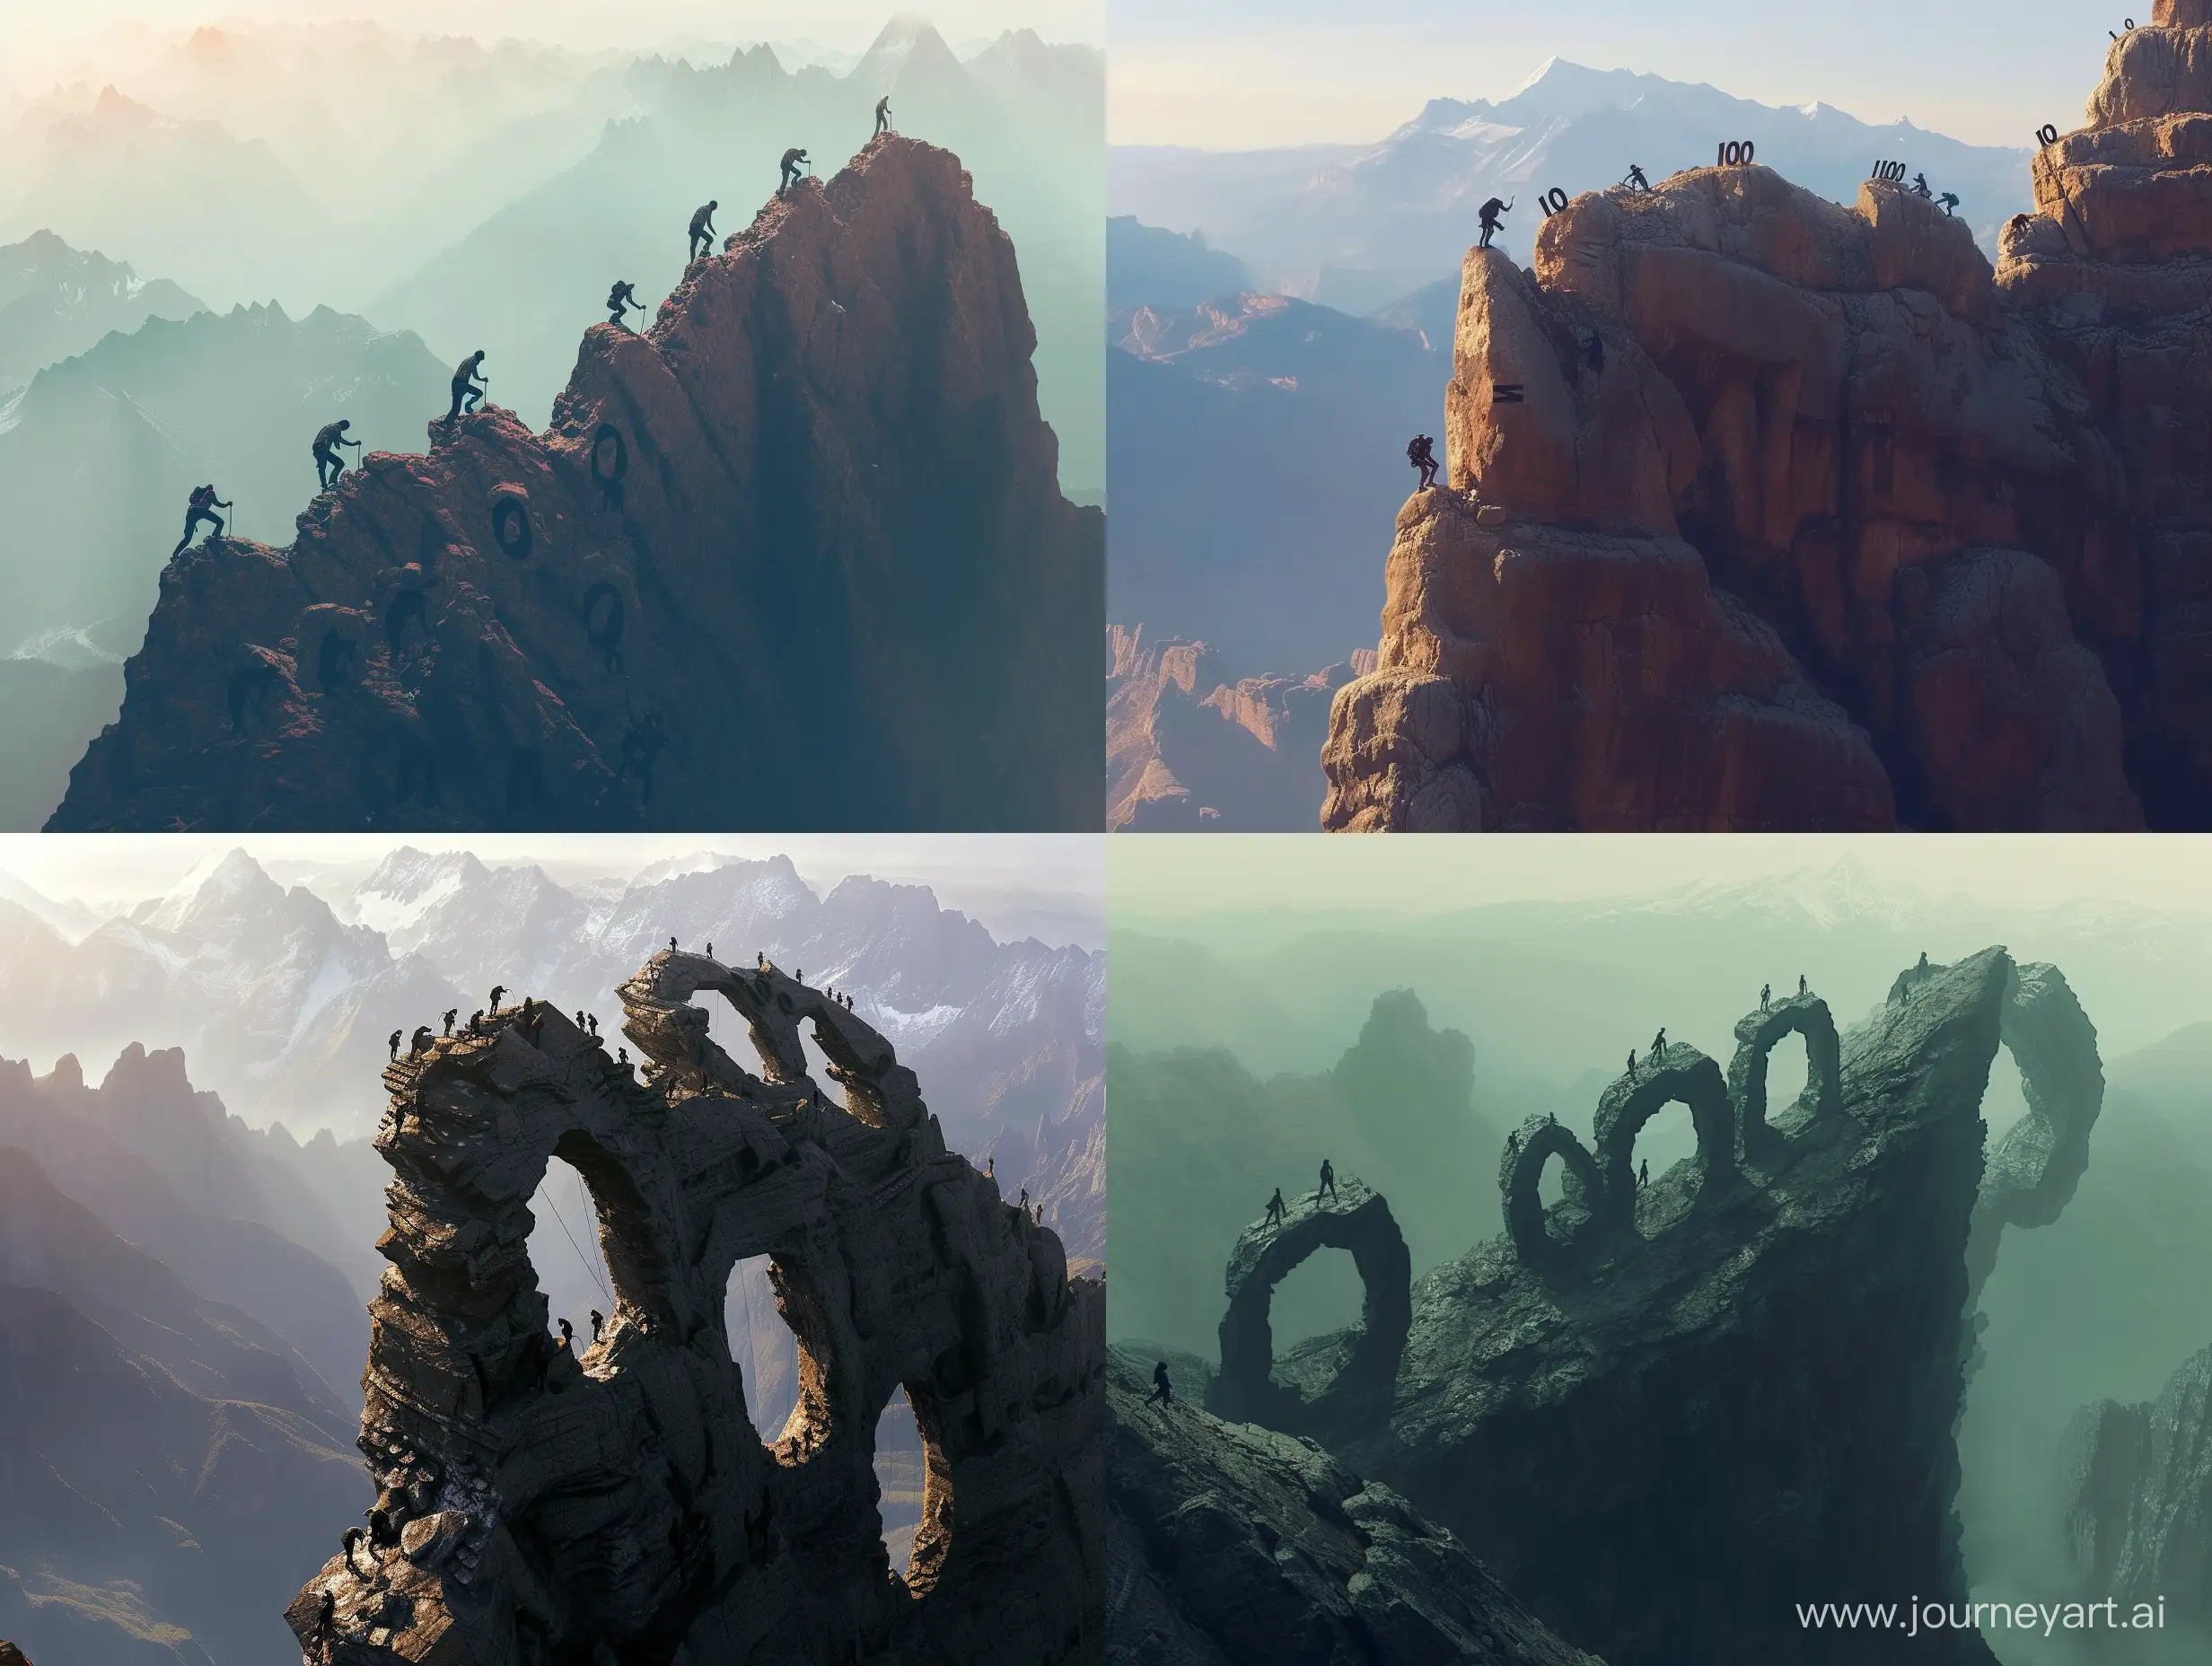 A group of people are trying to climb a high mountain with "1000" shaped rocks on the top and higher mountains in the distance, mild light, cyberpunk